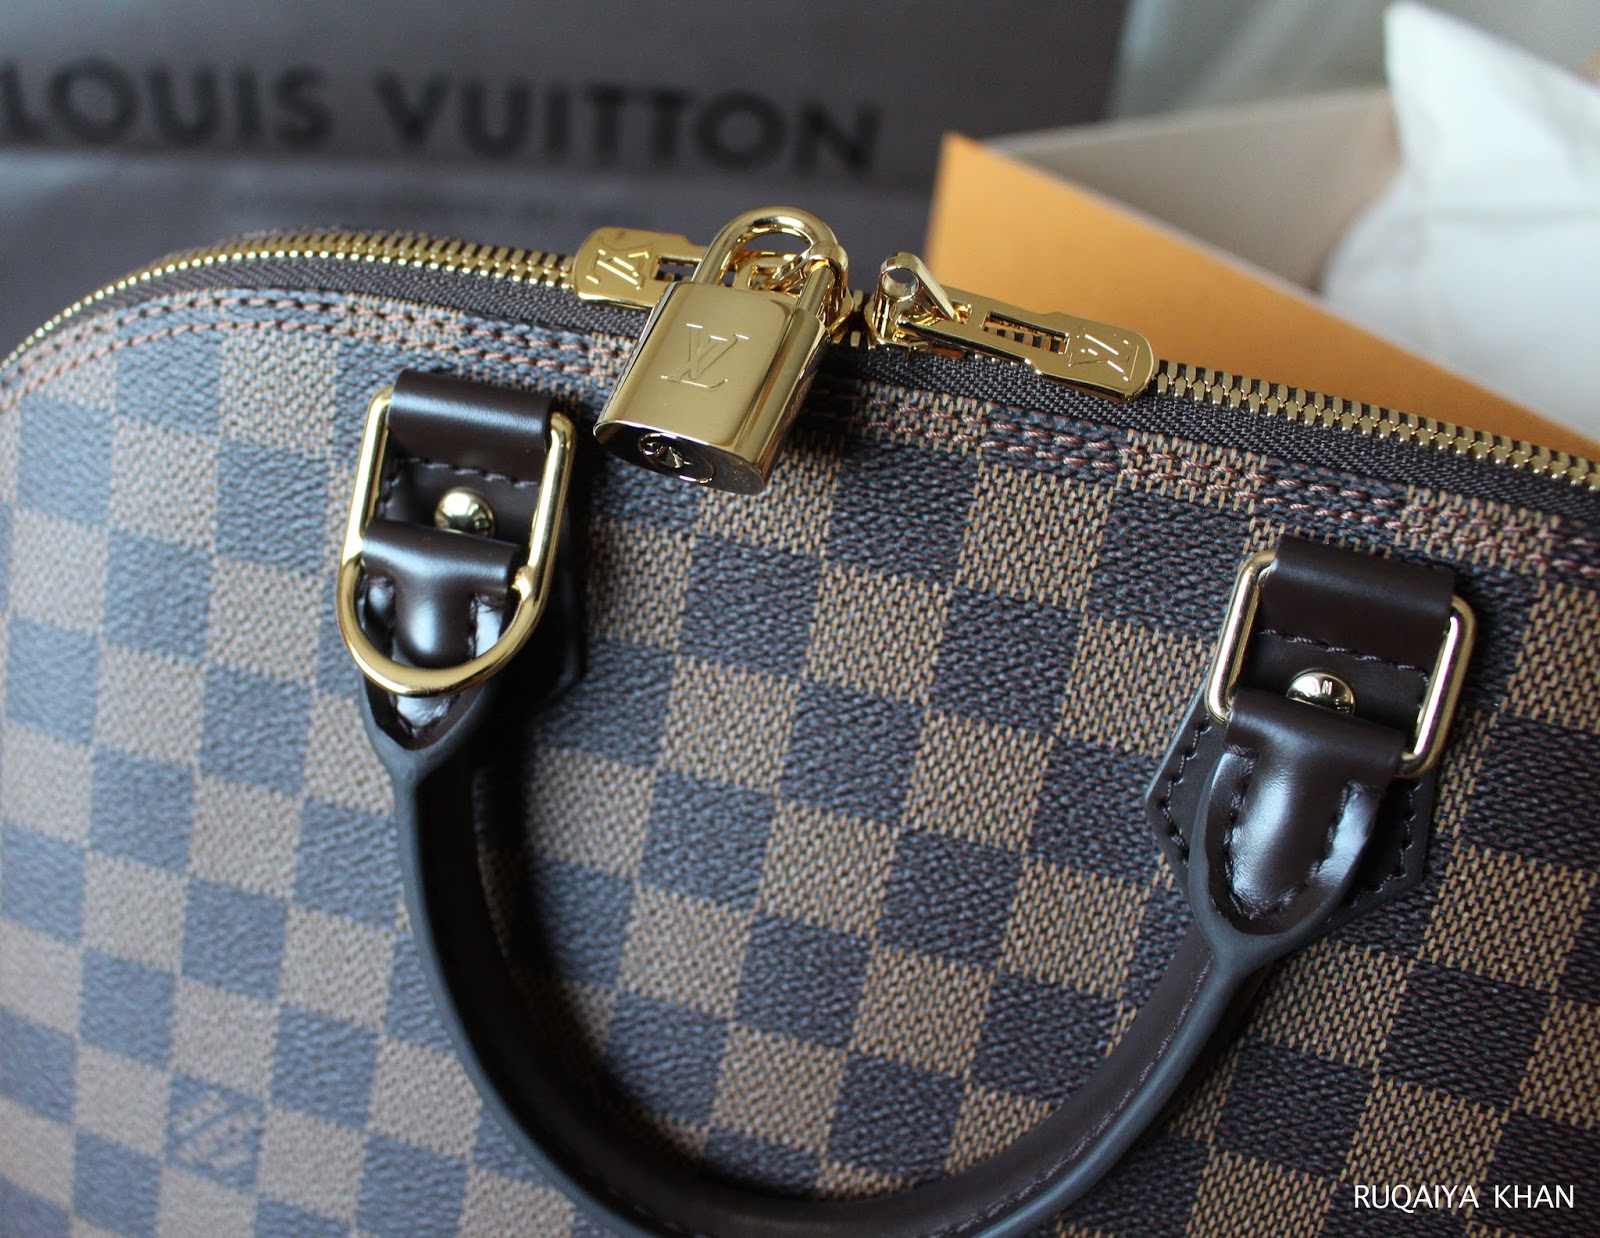 Review: Is the Louis Vuitton Alma BB worth the money? – Your